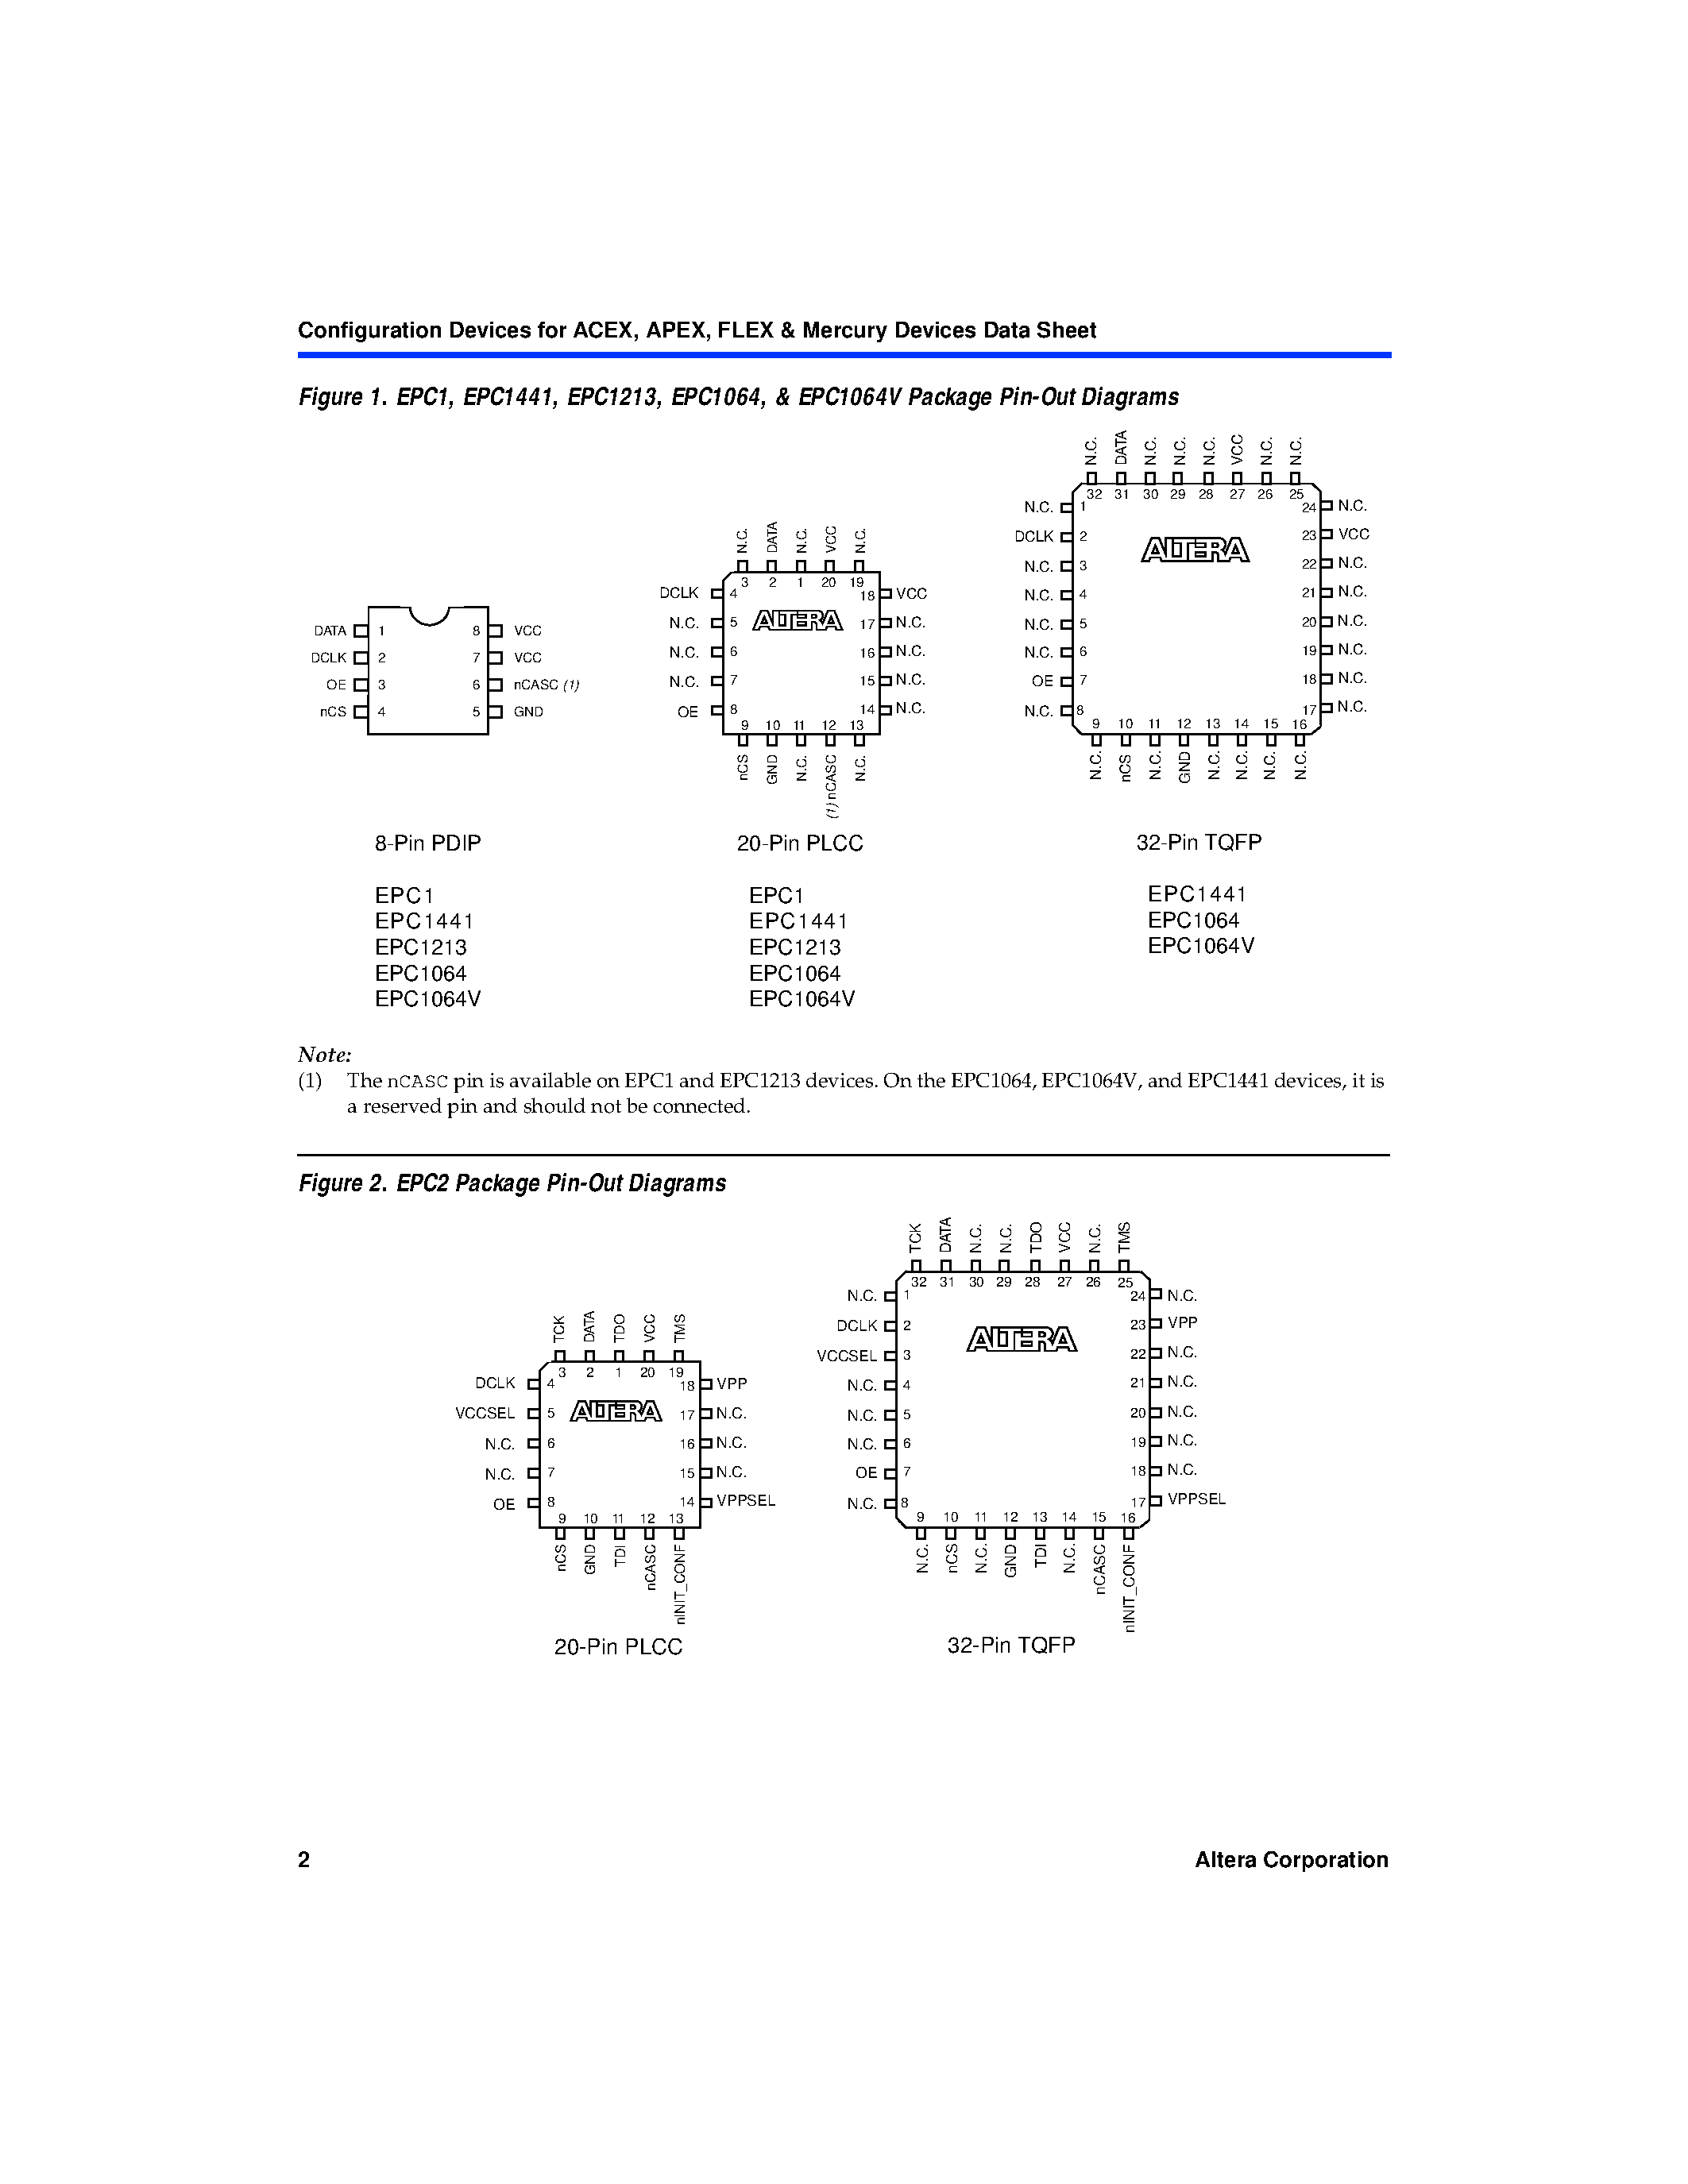 Datasheet EPC1064V - Configuration Devices for ACEX/ APEX/ FLEX & Mercury Devices page 2